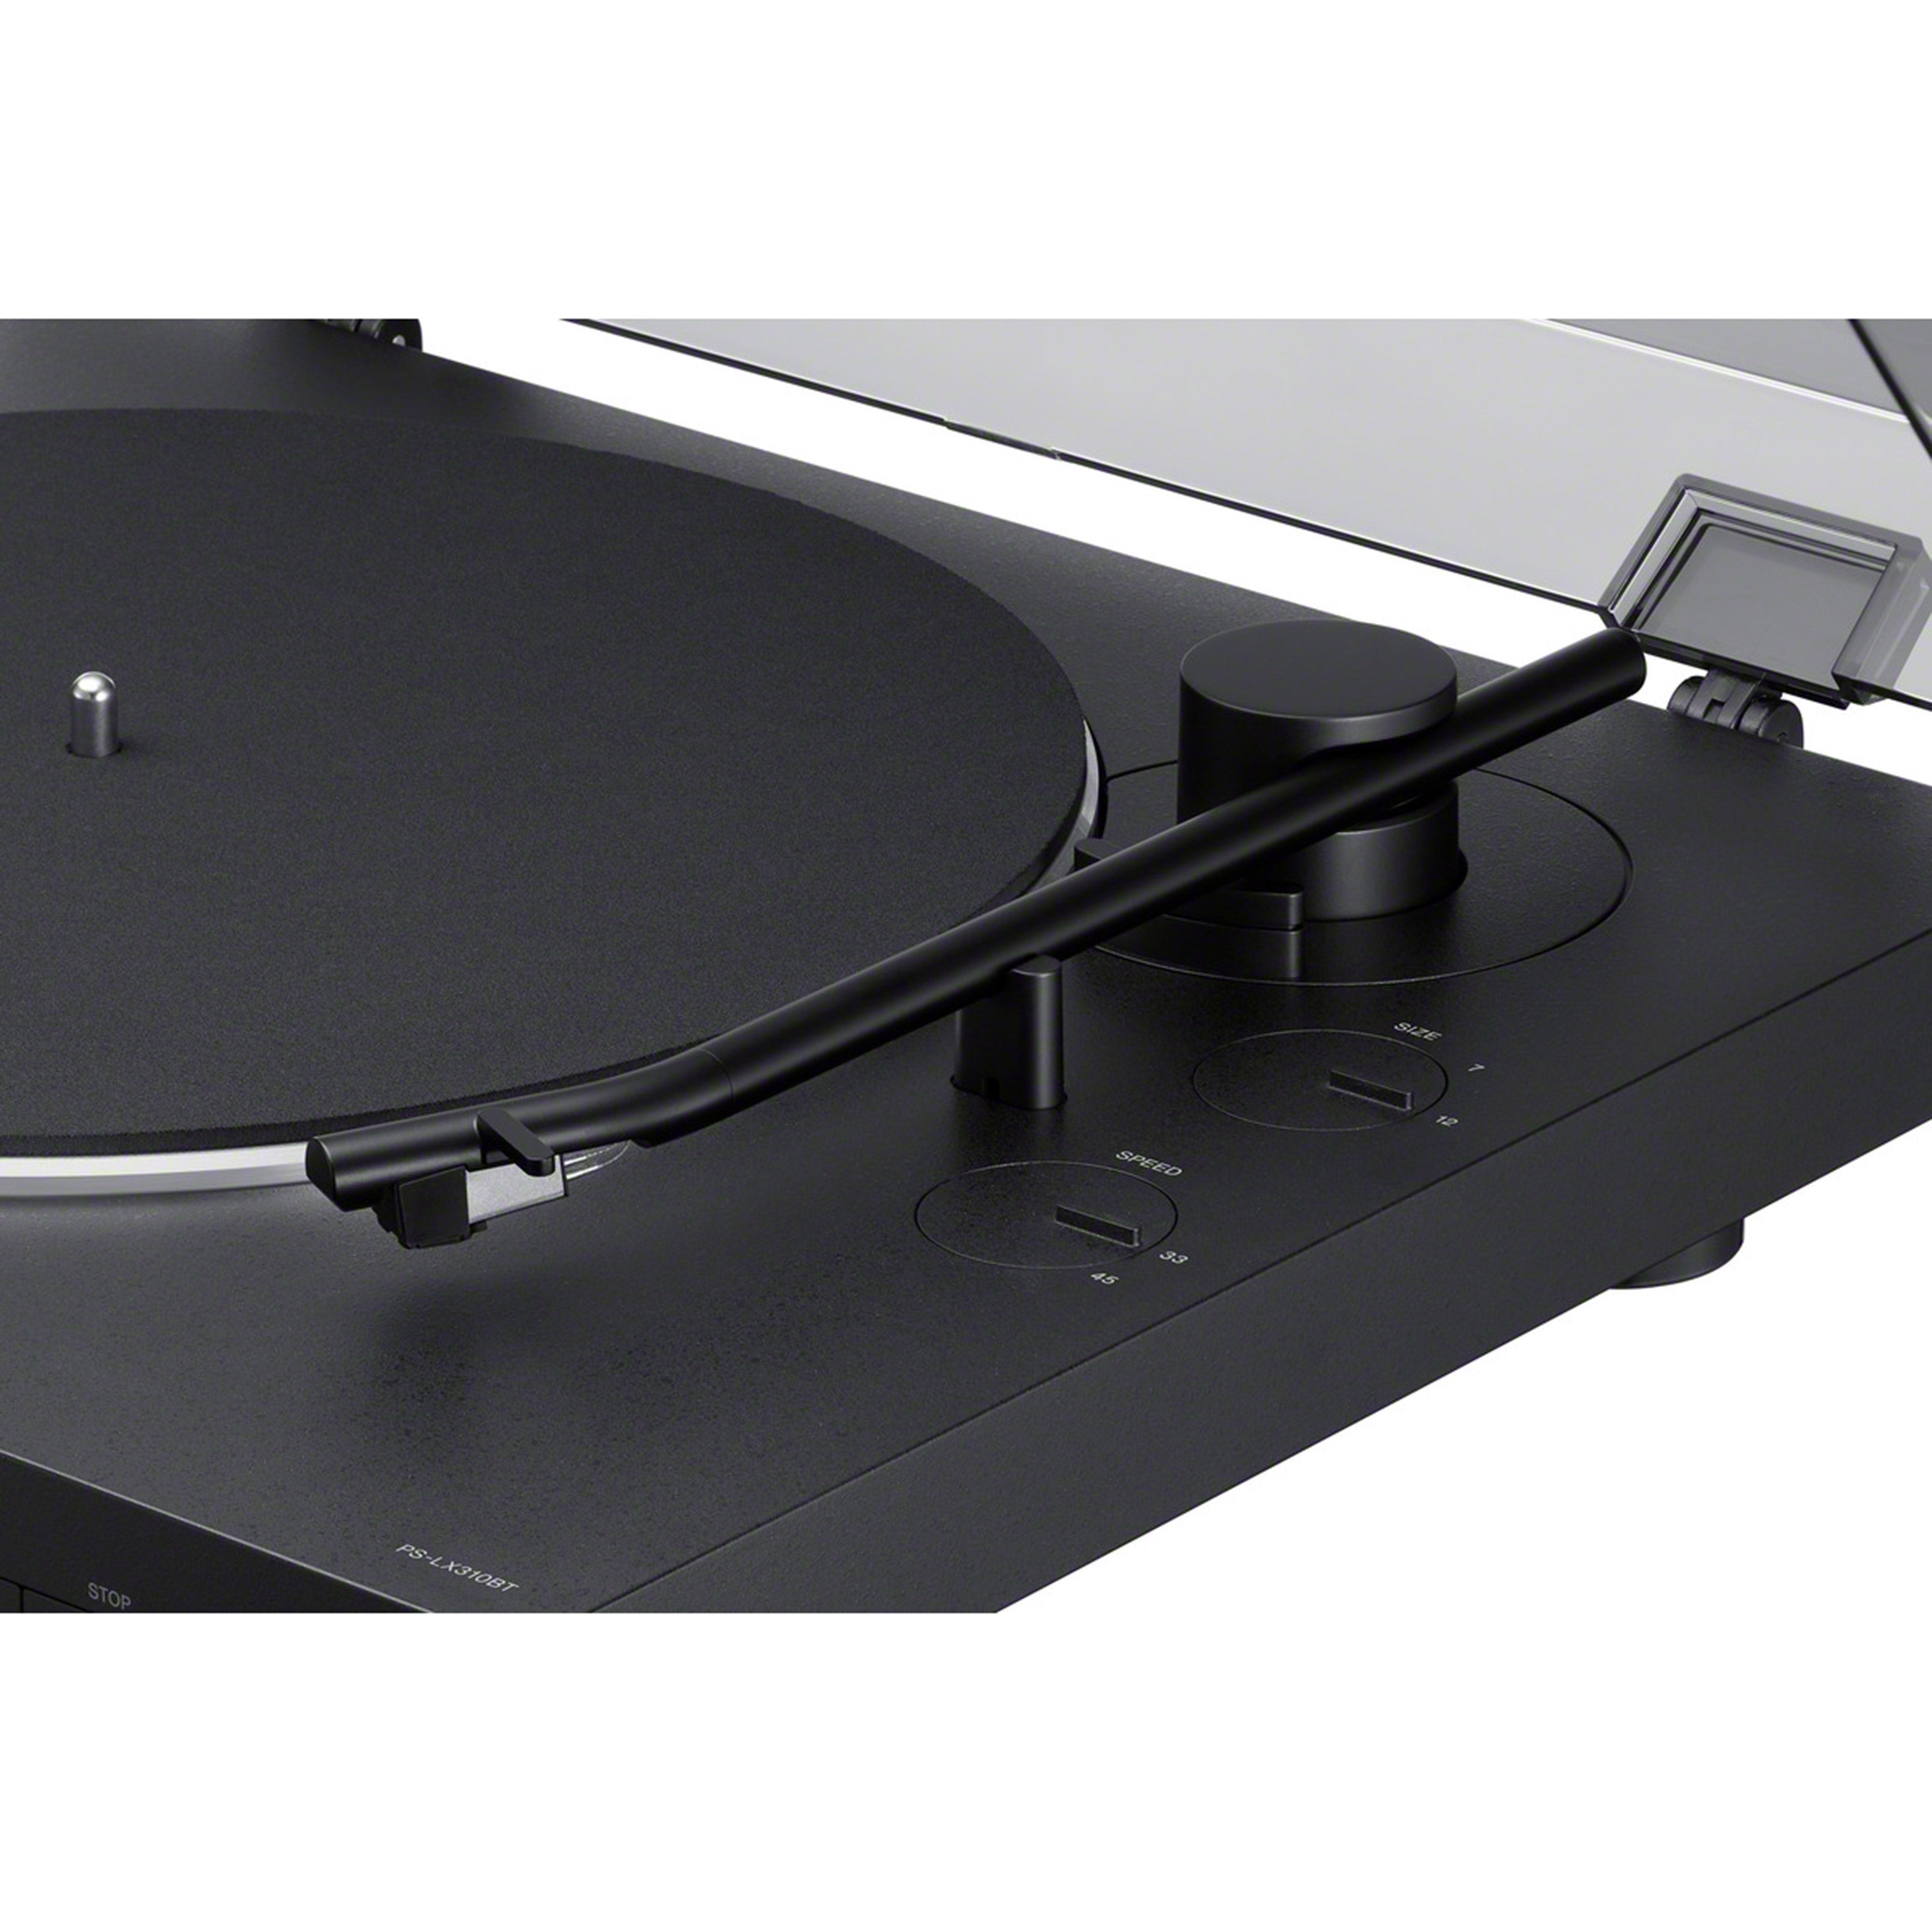 Sony 2-Speed Turntable with Built-in Bluetooth and USB Output PS-LX310BT